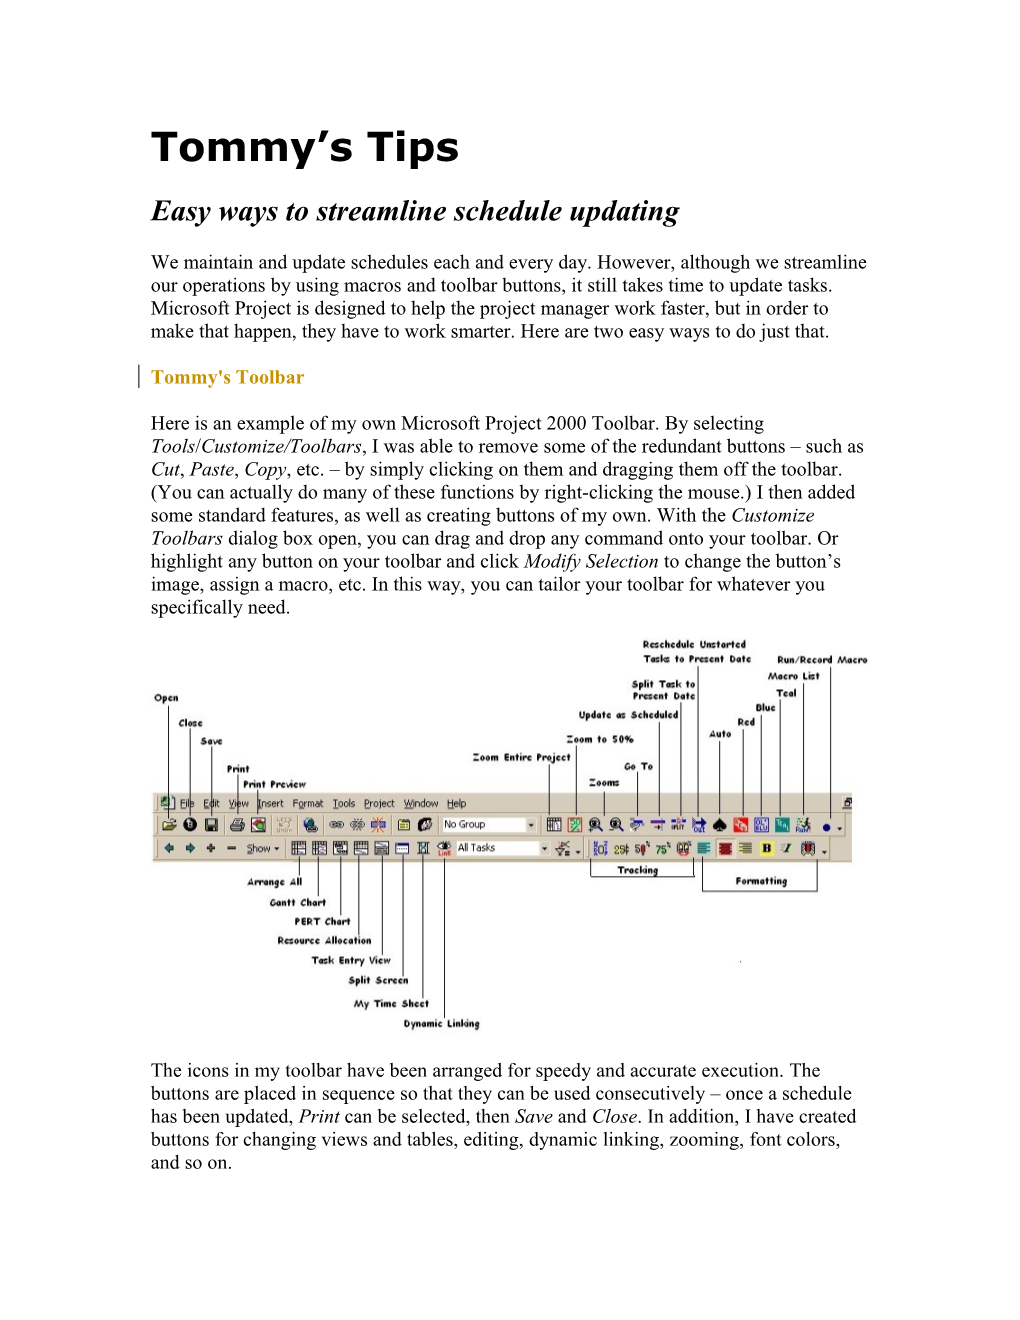 Subject: Tommy's Tips - Toolbar Setup and Handy Macros to Streamline Schedule Updating